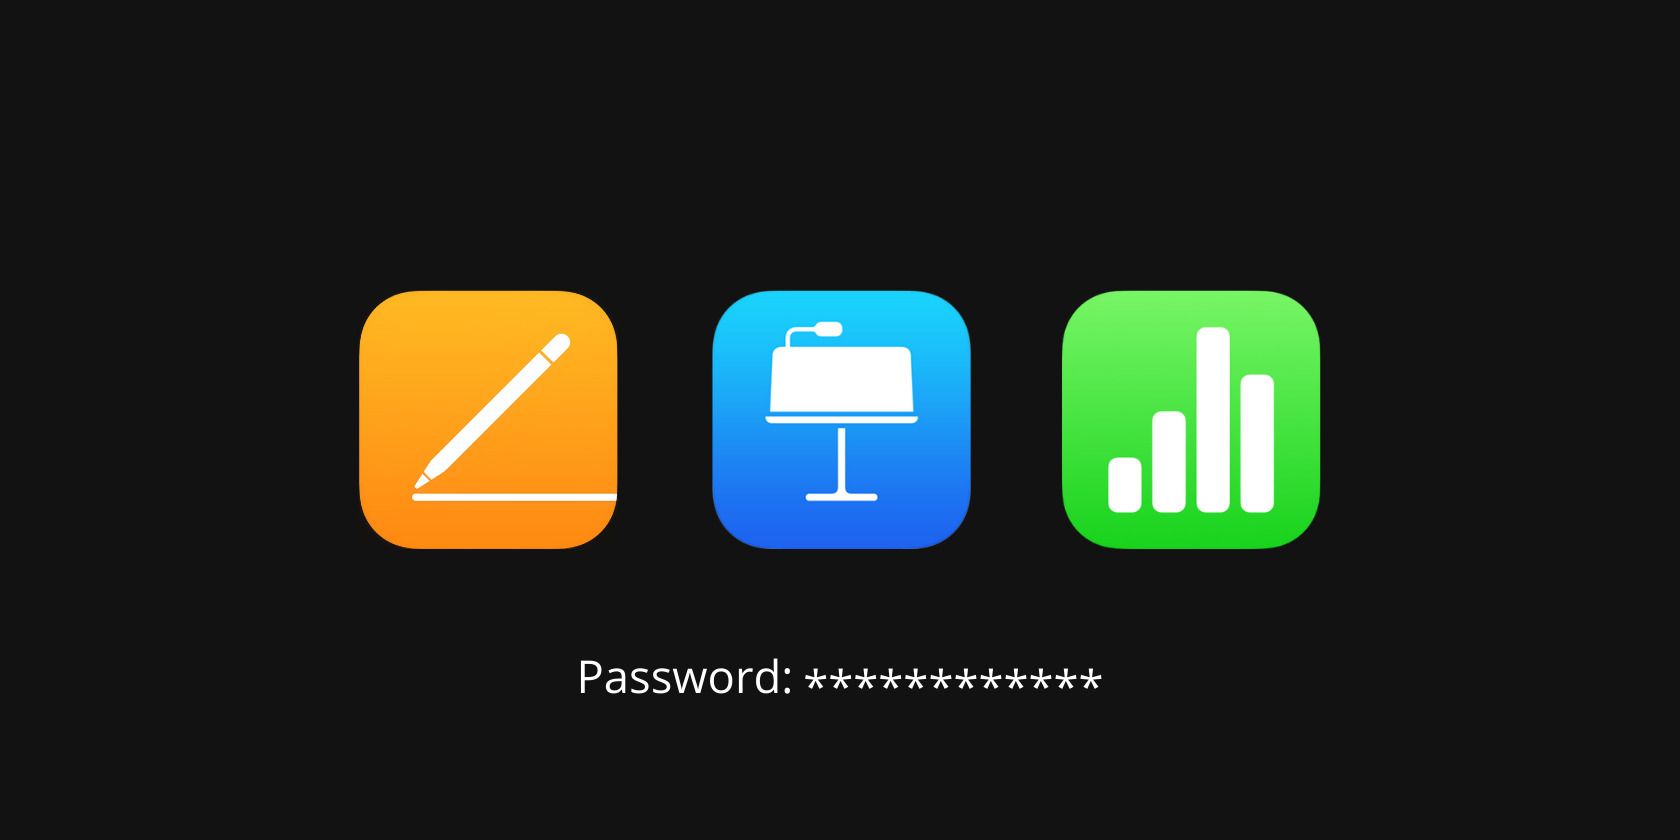 Pages, Keynote, and Numbers app icon